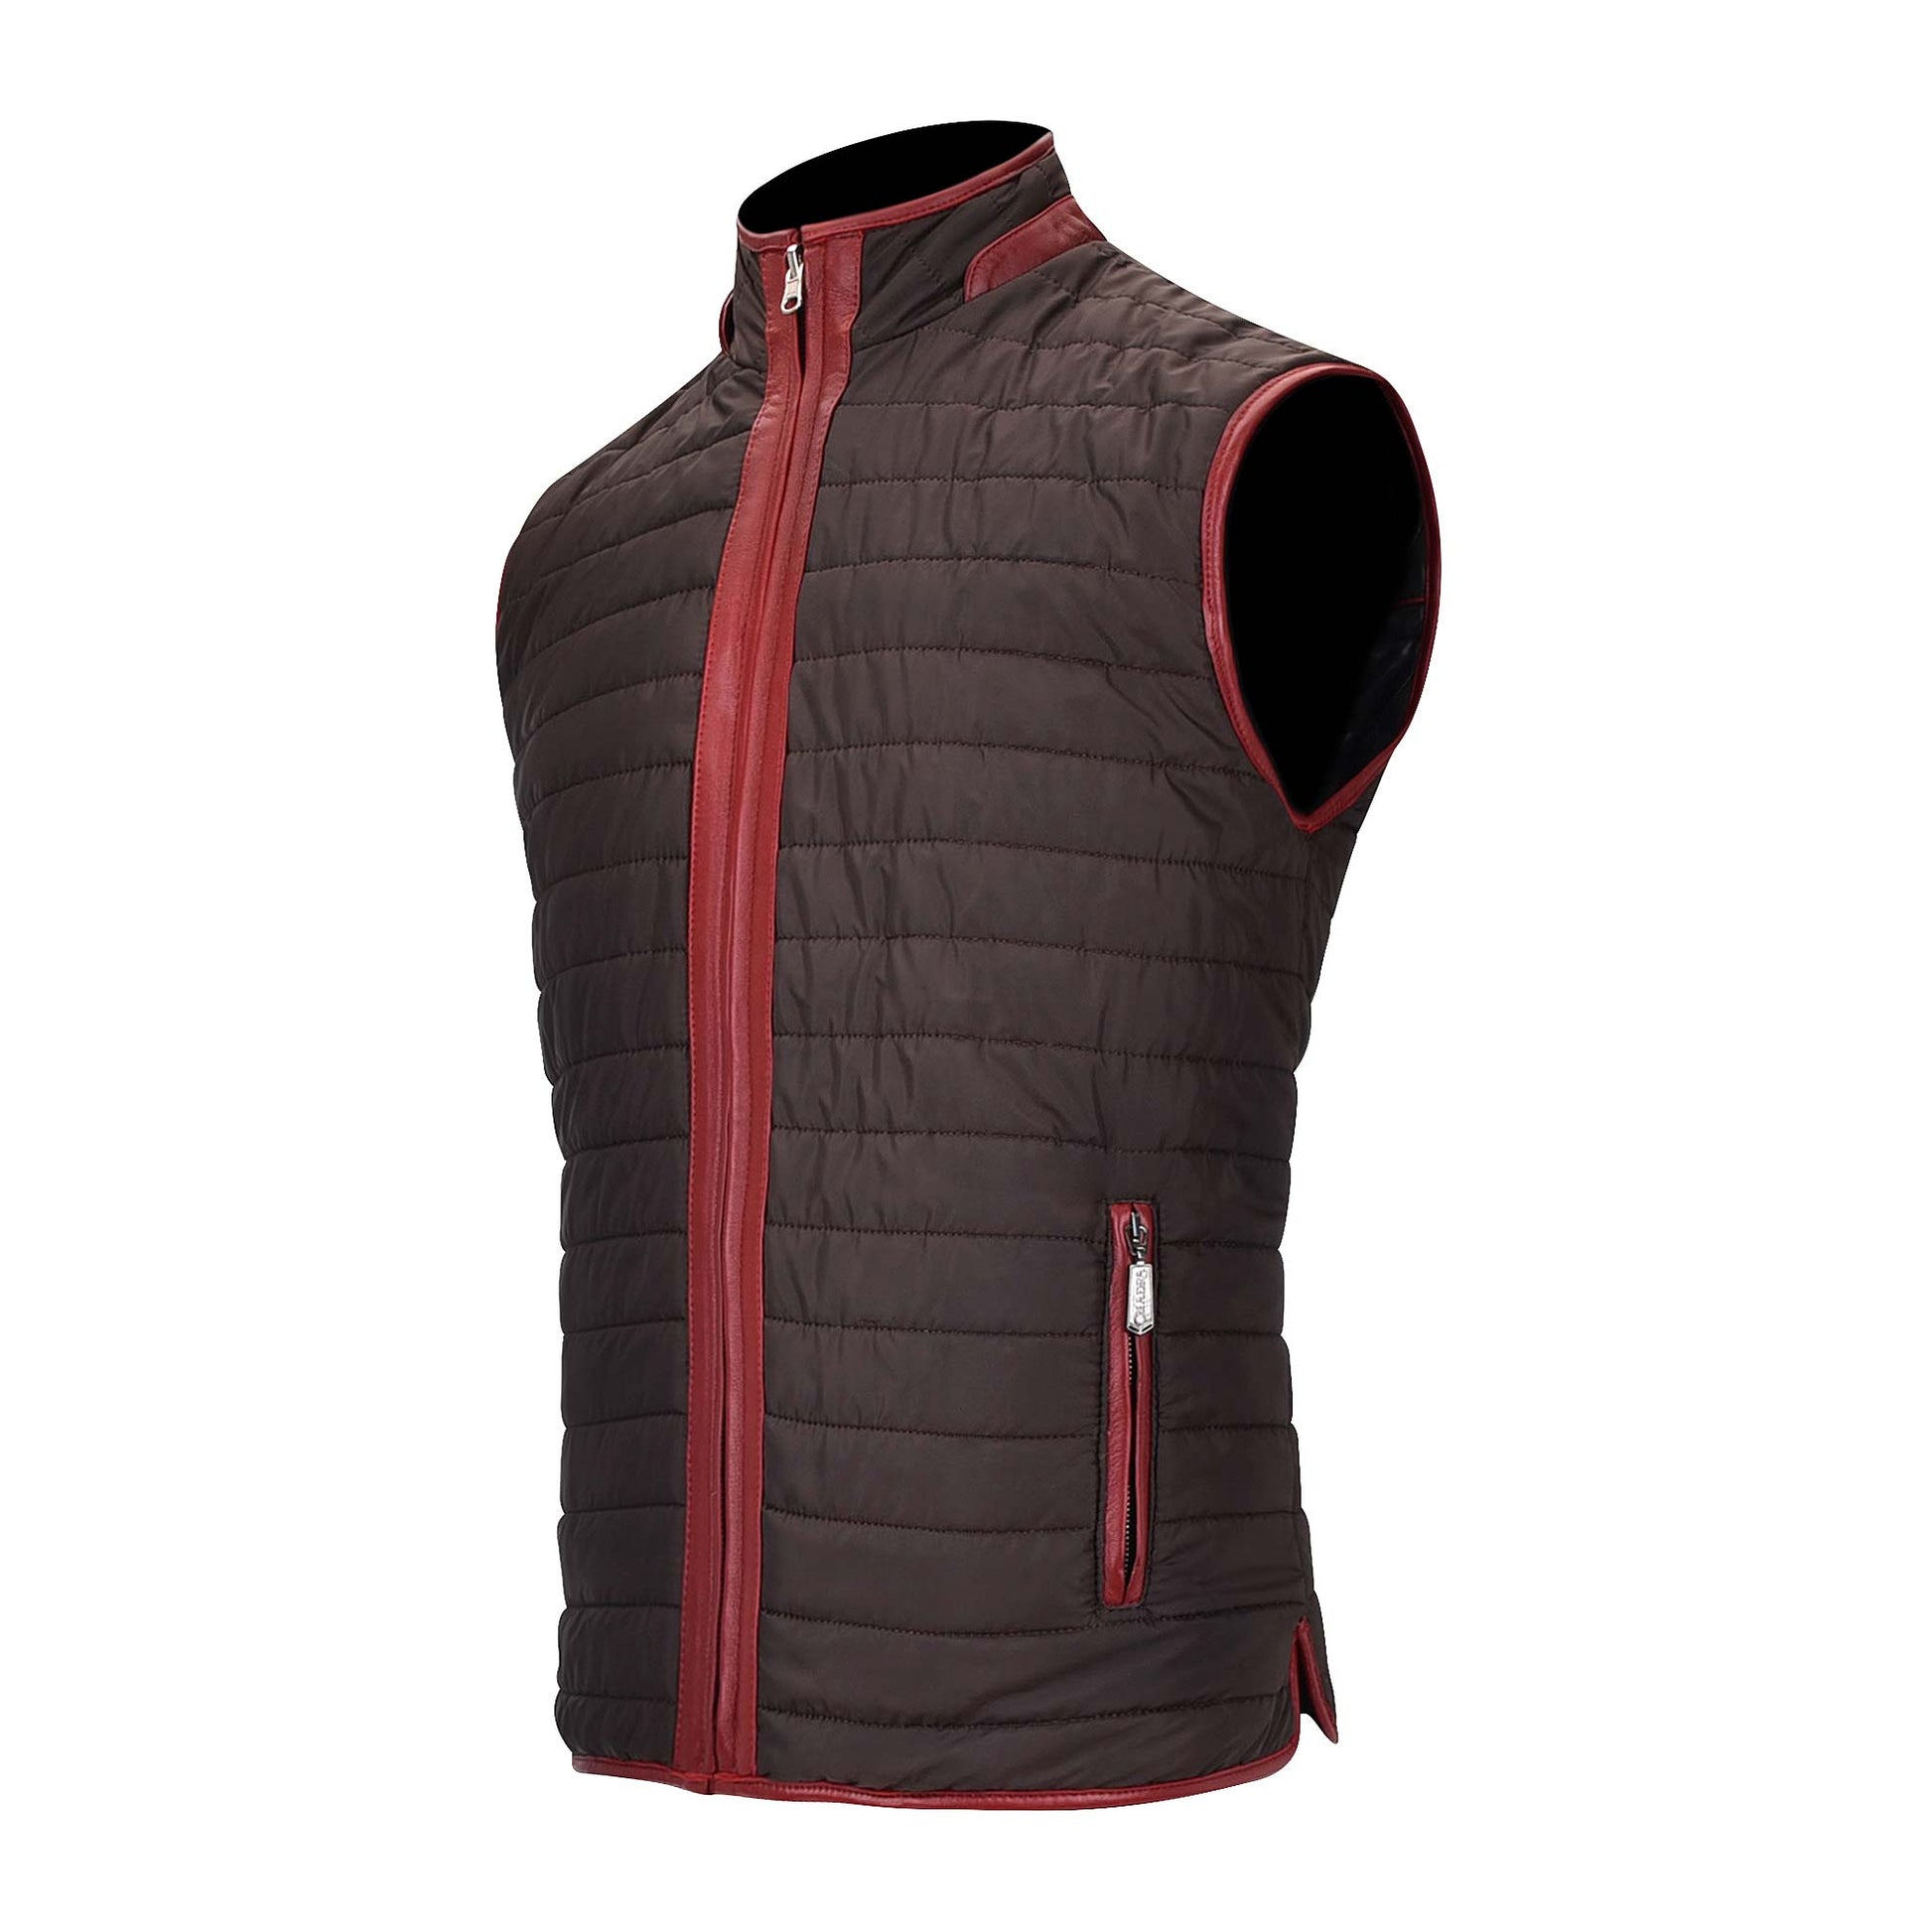 Reversivle warm padded fabric with touches of red in zippers